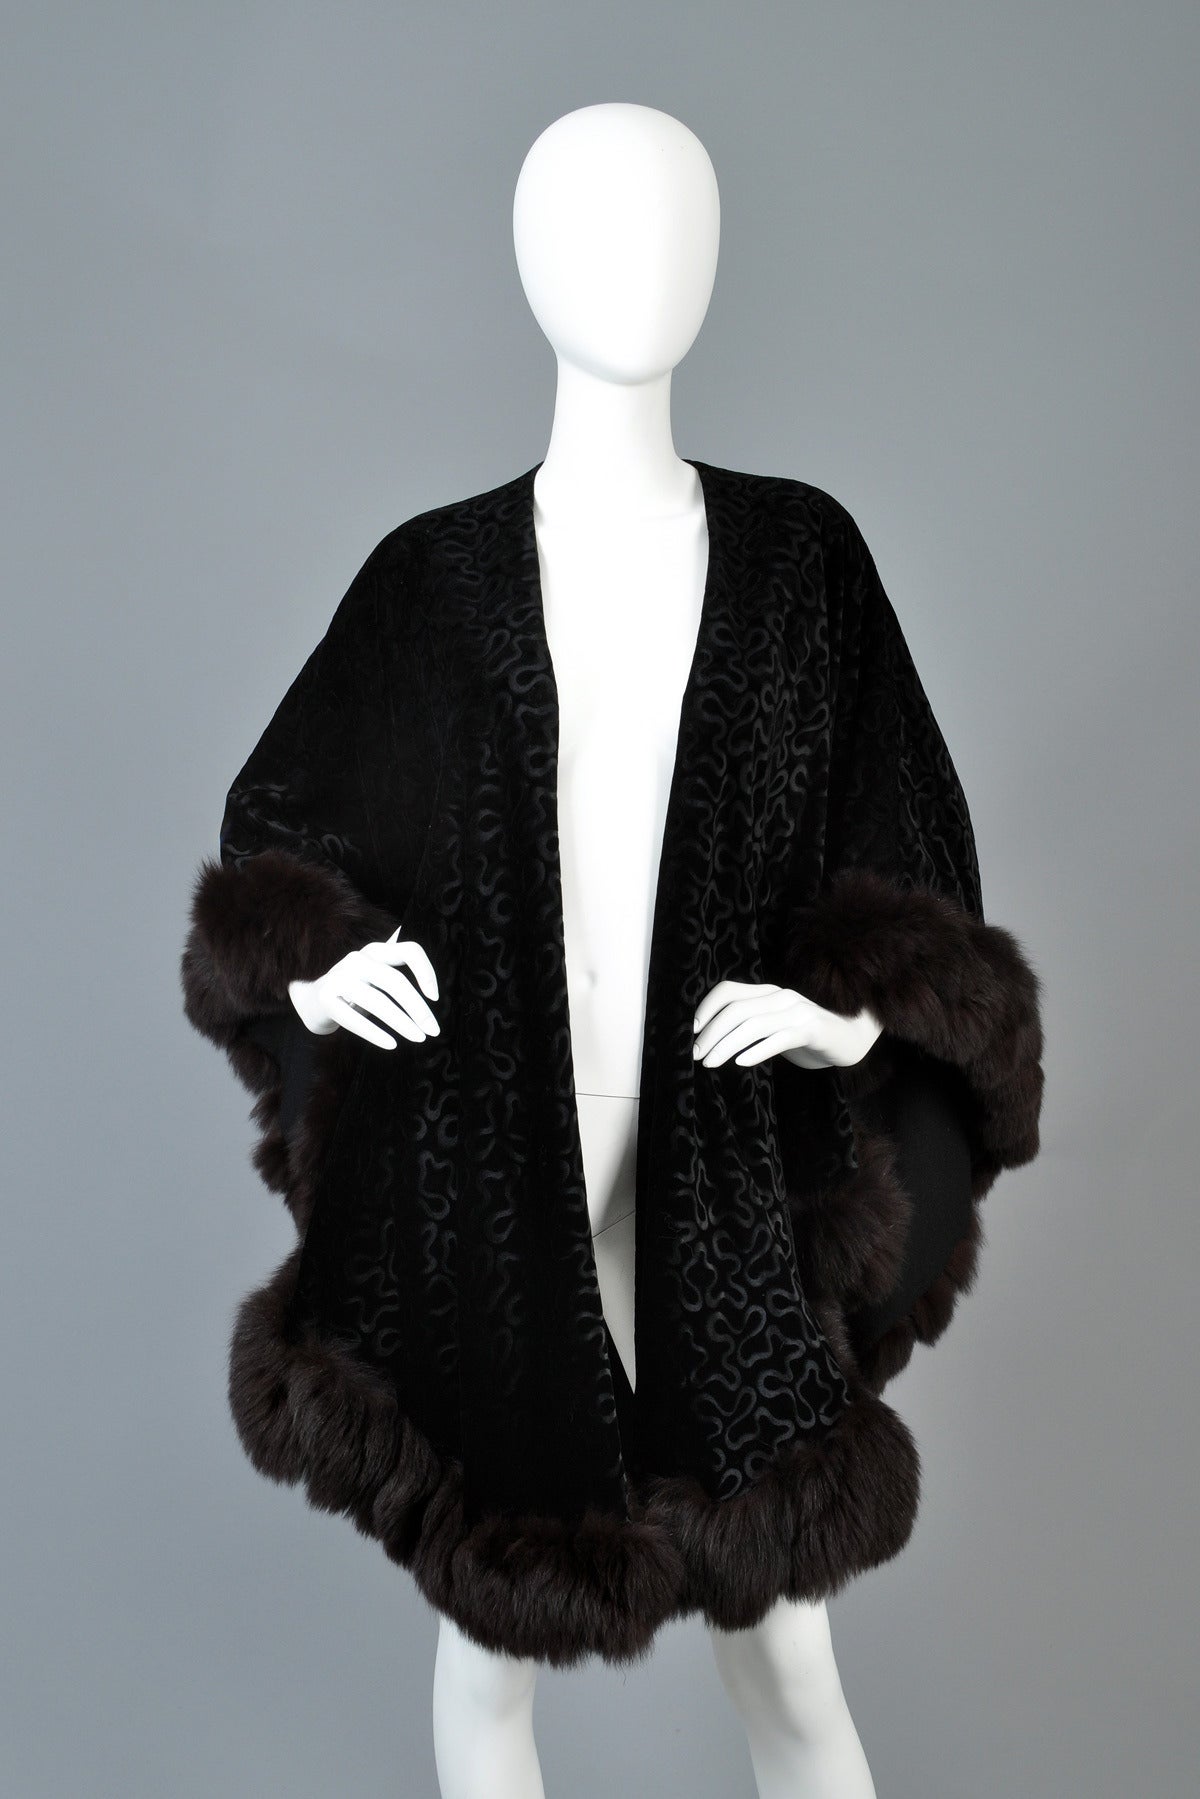 Fabulous 1980s Adrienne Landau textured velvet cape with fox fur trim. Incredible piece! Ultra draped black velvet with textured swirls running throughout. Long black dyed fox fur trim. Cozy wool flannel lining.  Designed to be worn open. Excellent